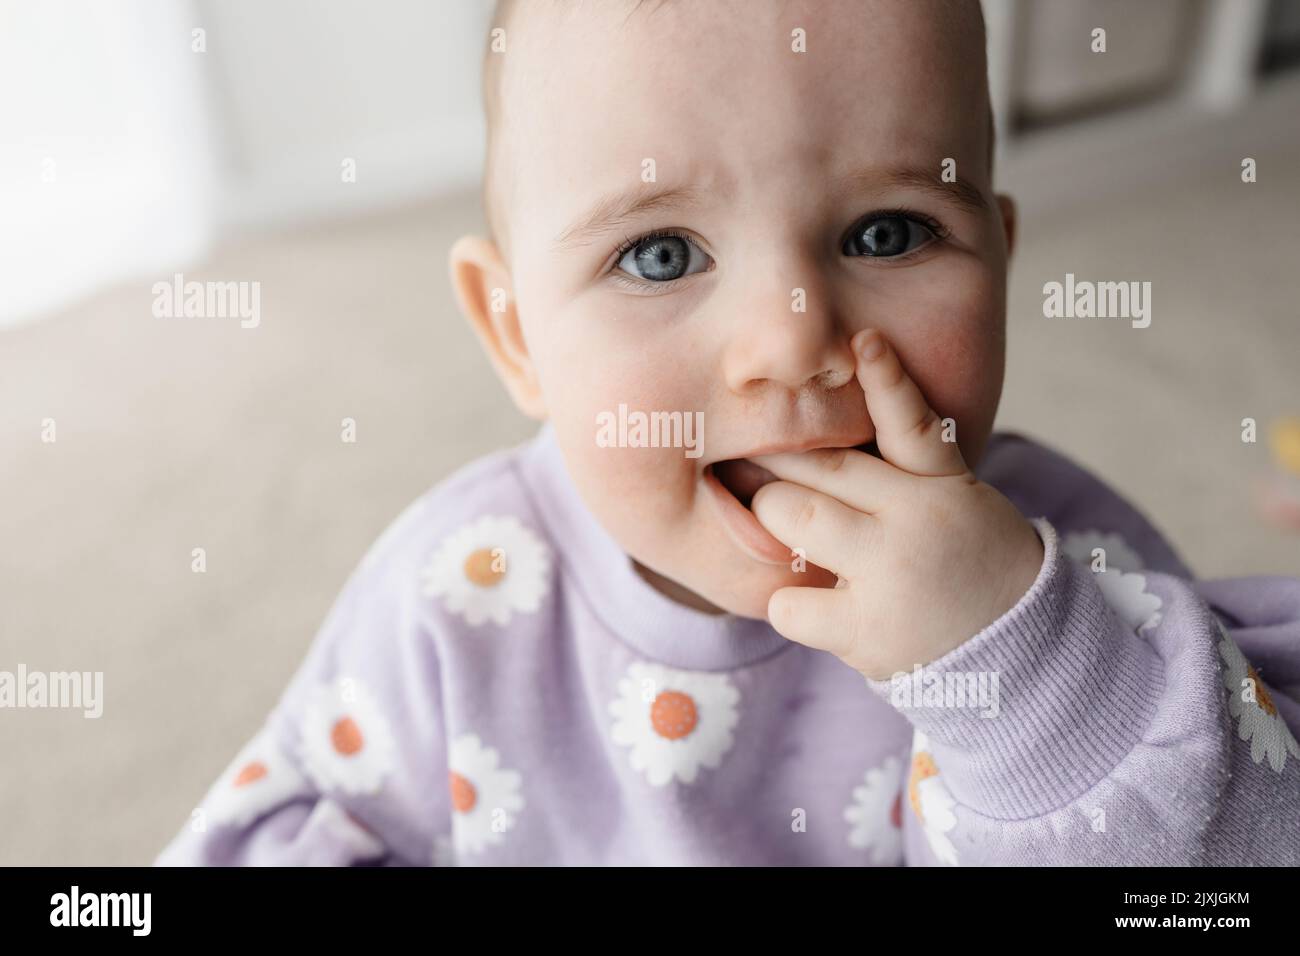 A one year old caucasian girl with blue eyes sitting on the ground playing with blocks Stock Photo